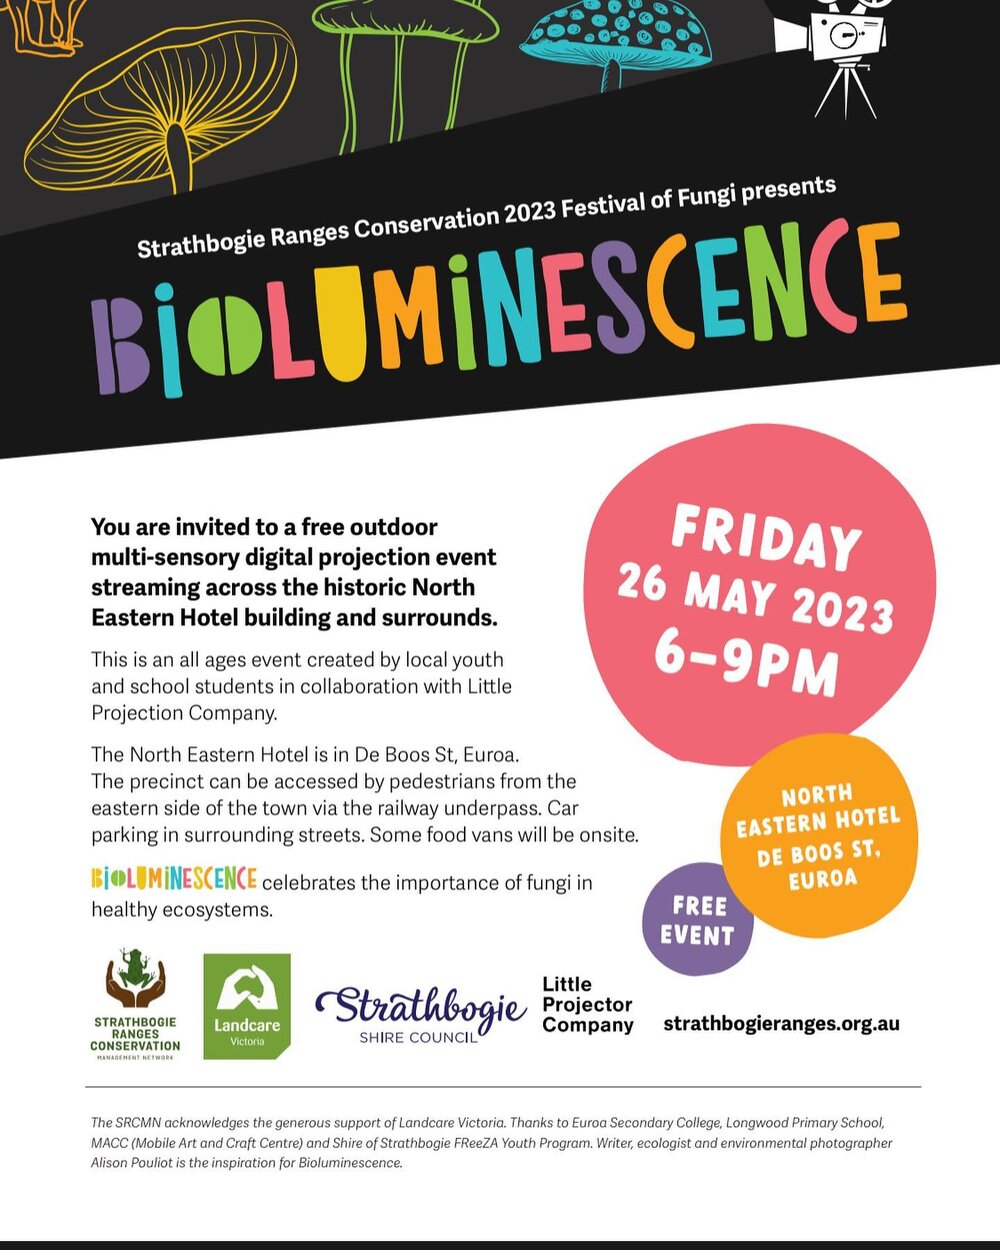 One more sleep until the glow of Bioluminescence drifts amongst the nocturnal, washes over the hallowed walls of the Great North Eastern Hotel, and spills forth painting space for a fun way to connect with the Festival of Fungi in Euroa. Everyone is 